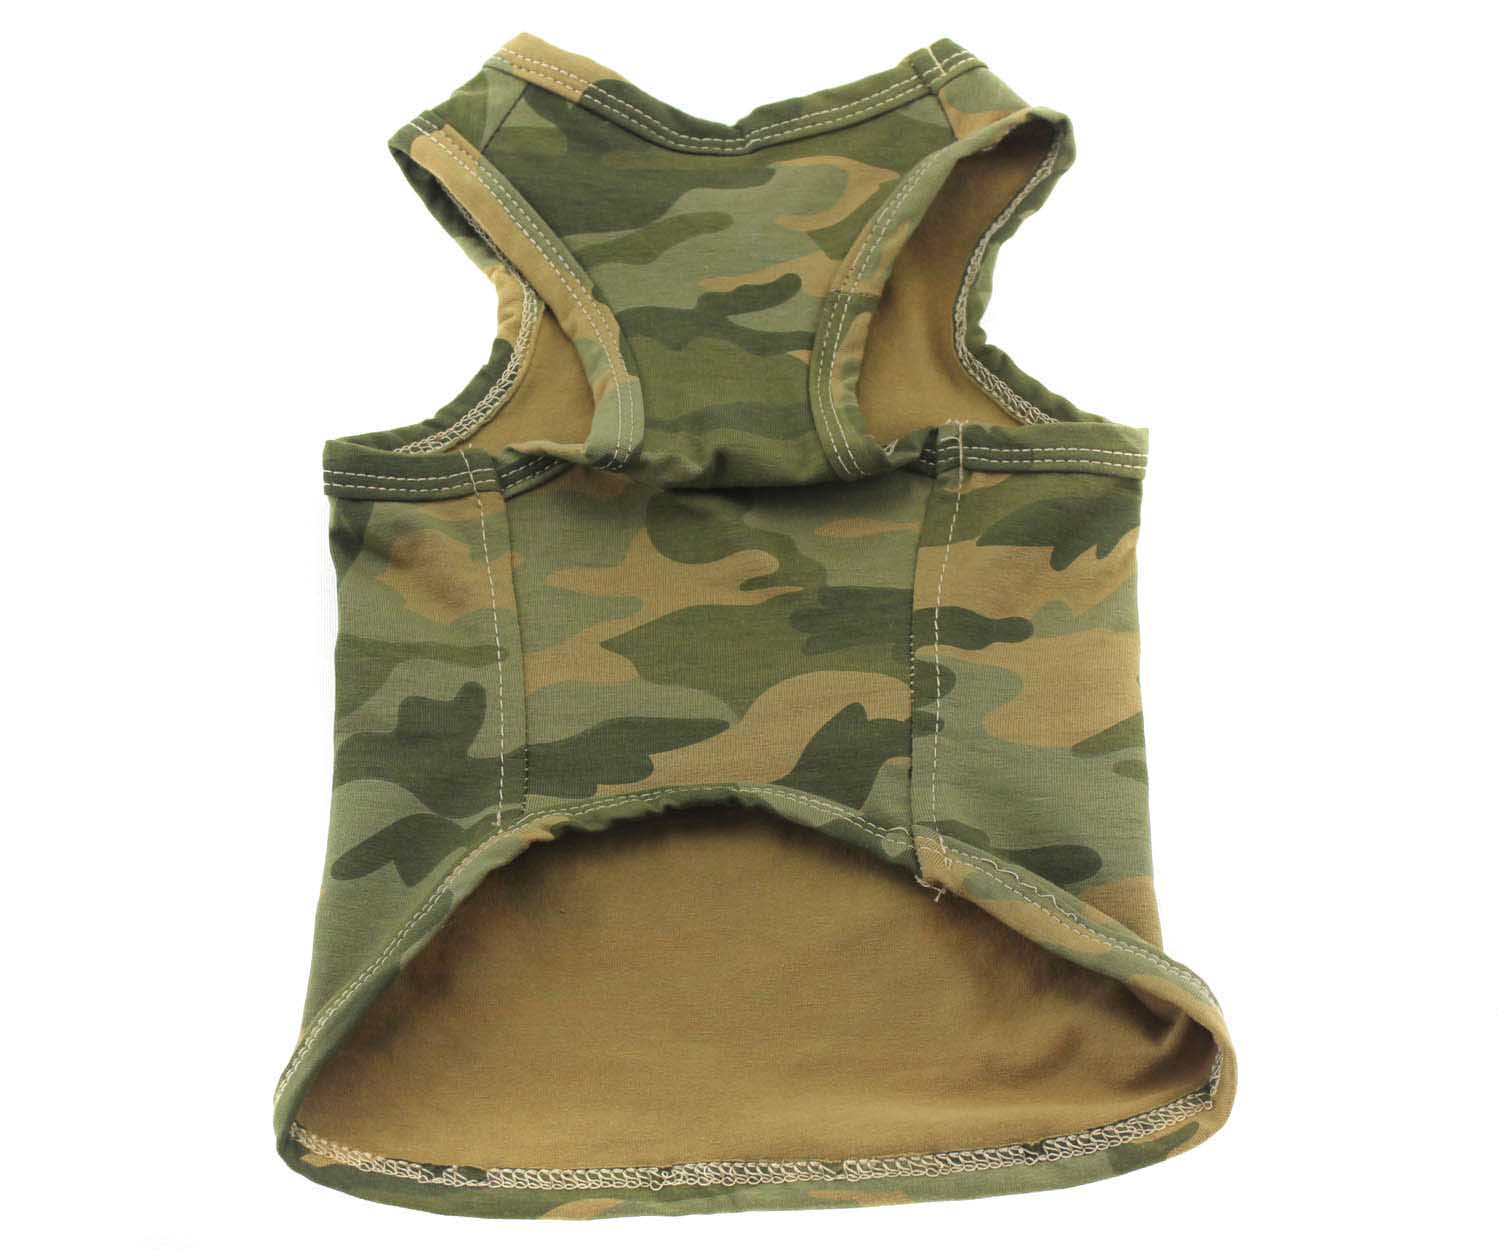 2018 New Camouflage Tanks Top T-shirts